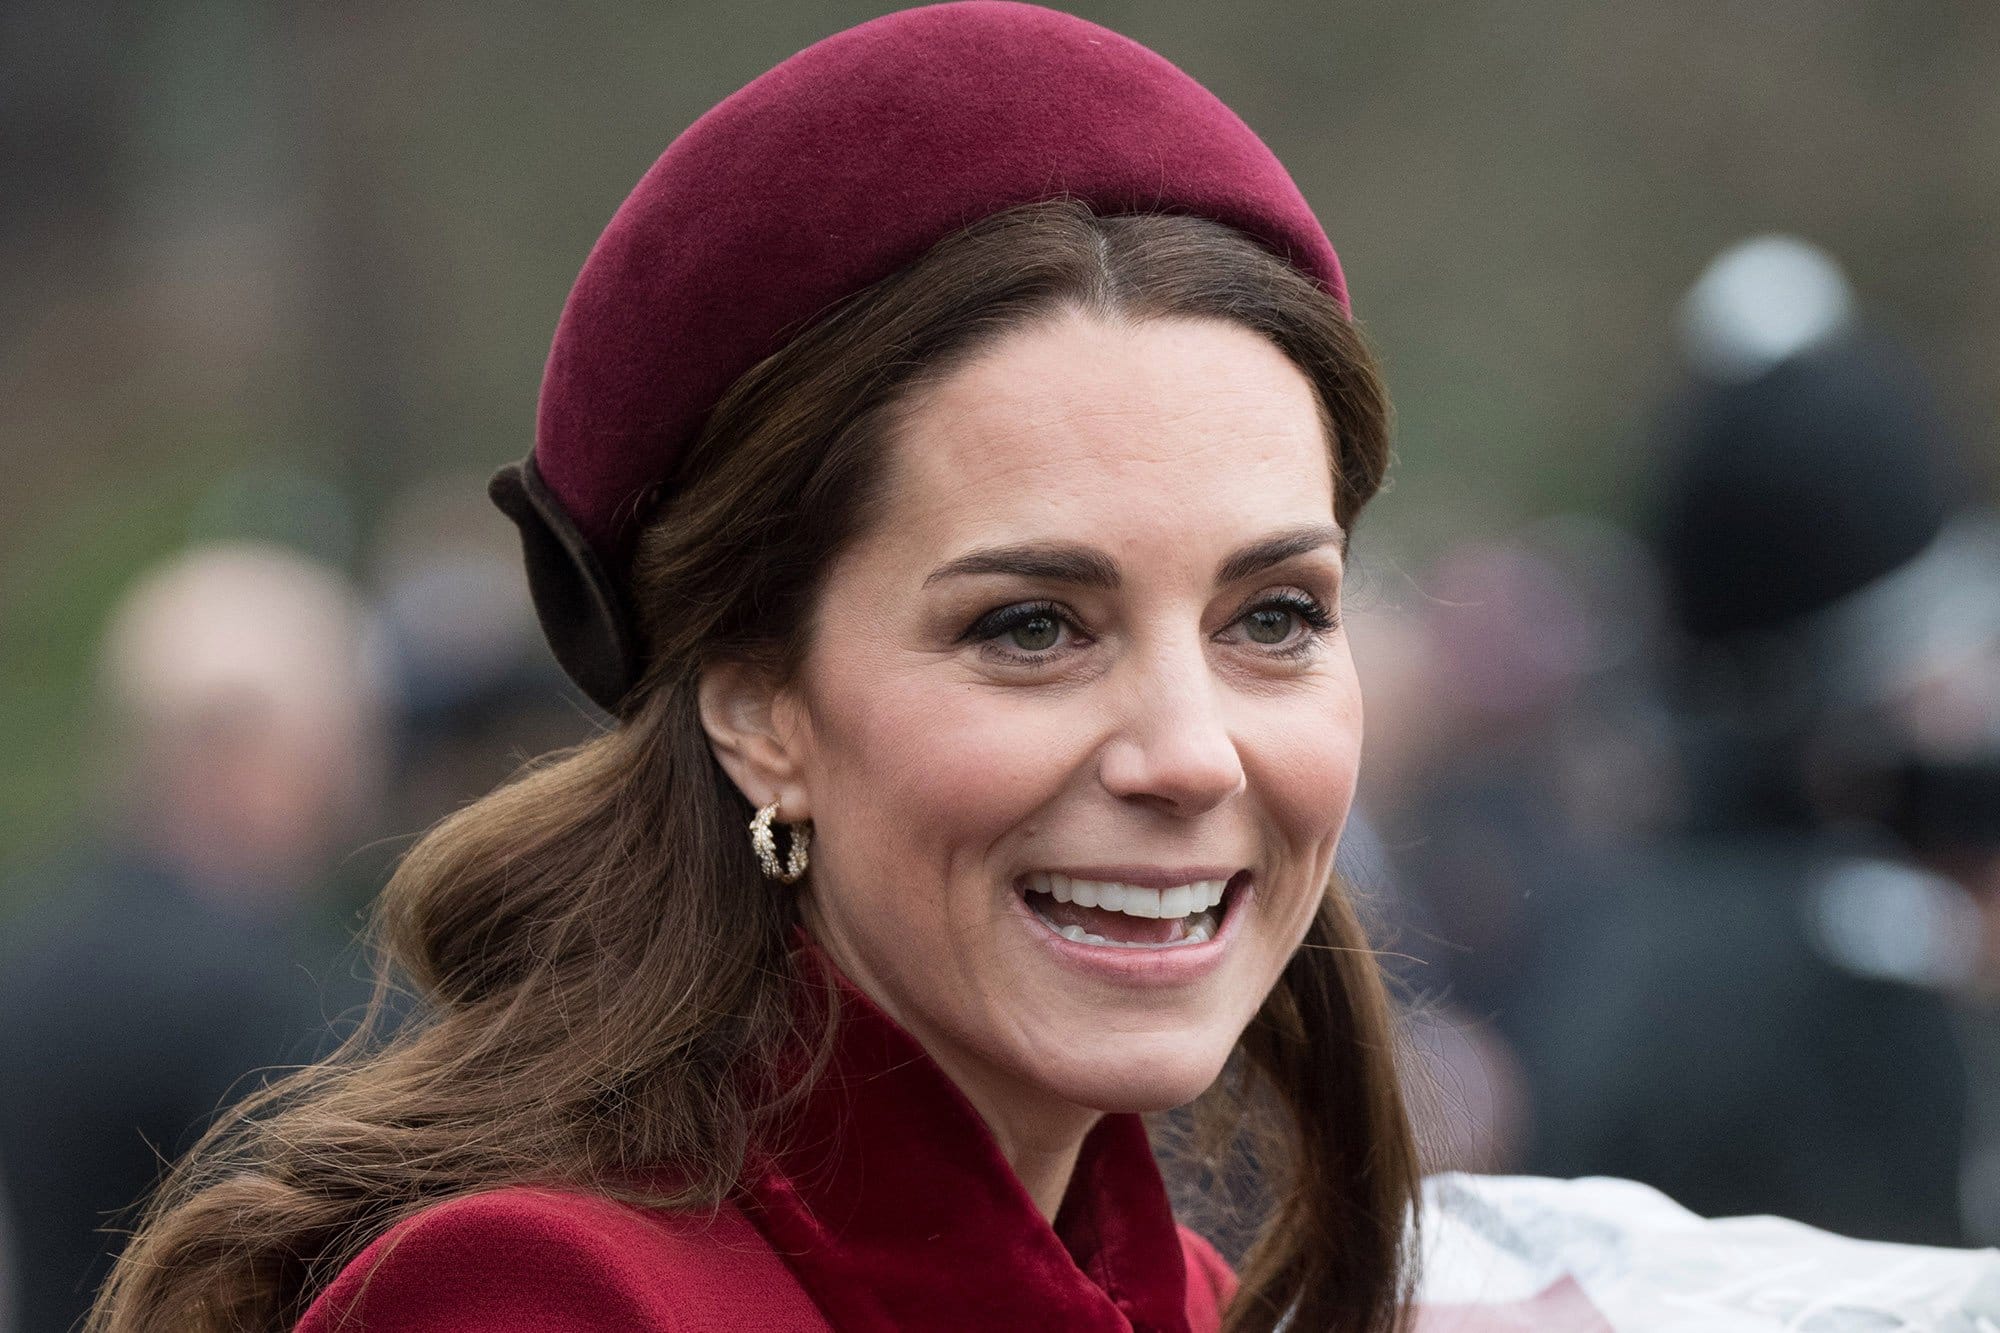 Kate Middleton Caught in Major Security Breach as Hospital Staff Attempt Unauthorized Access to Her Medical Records